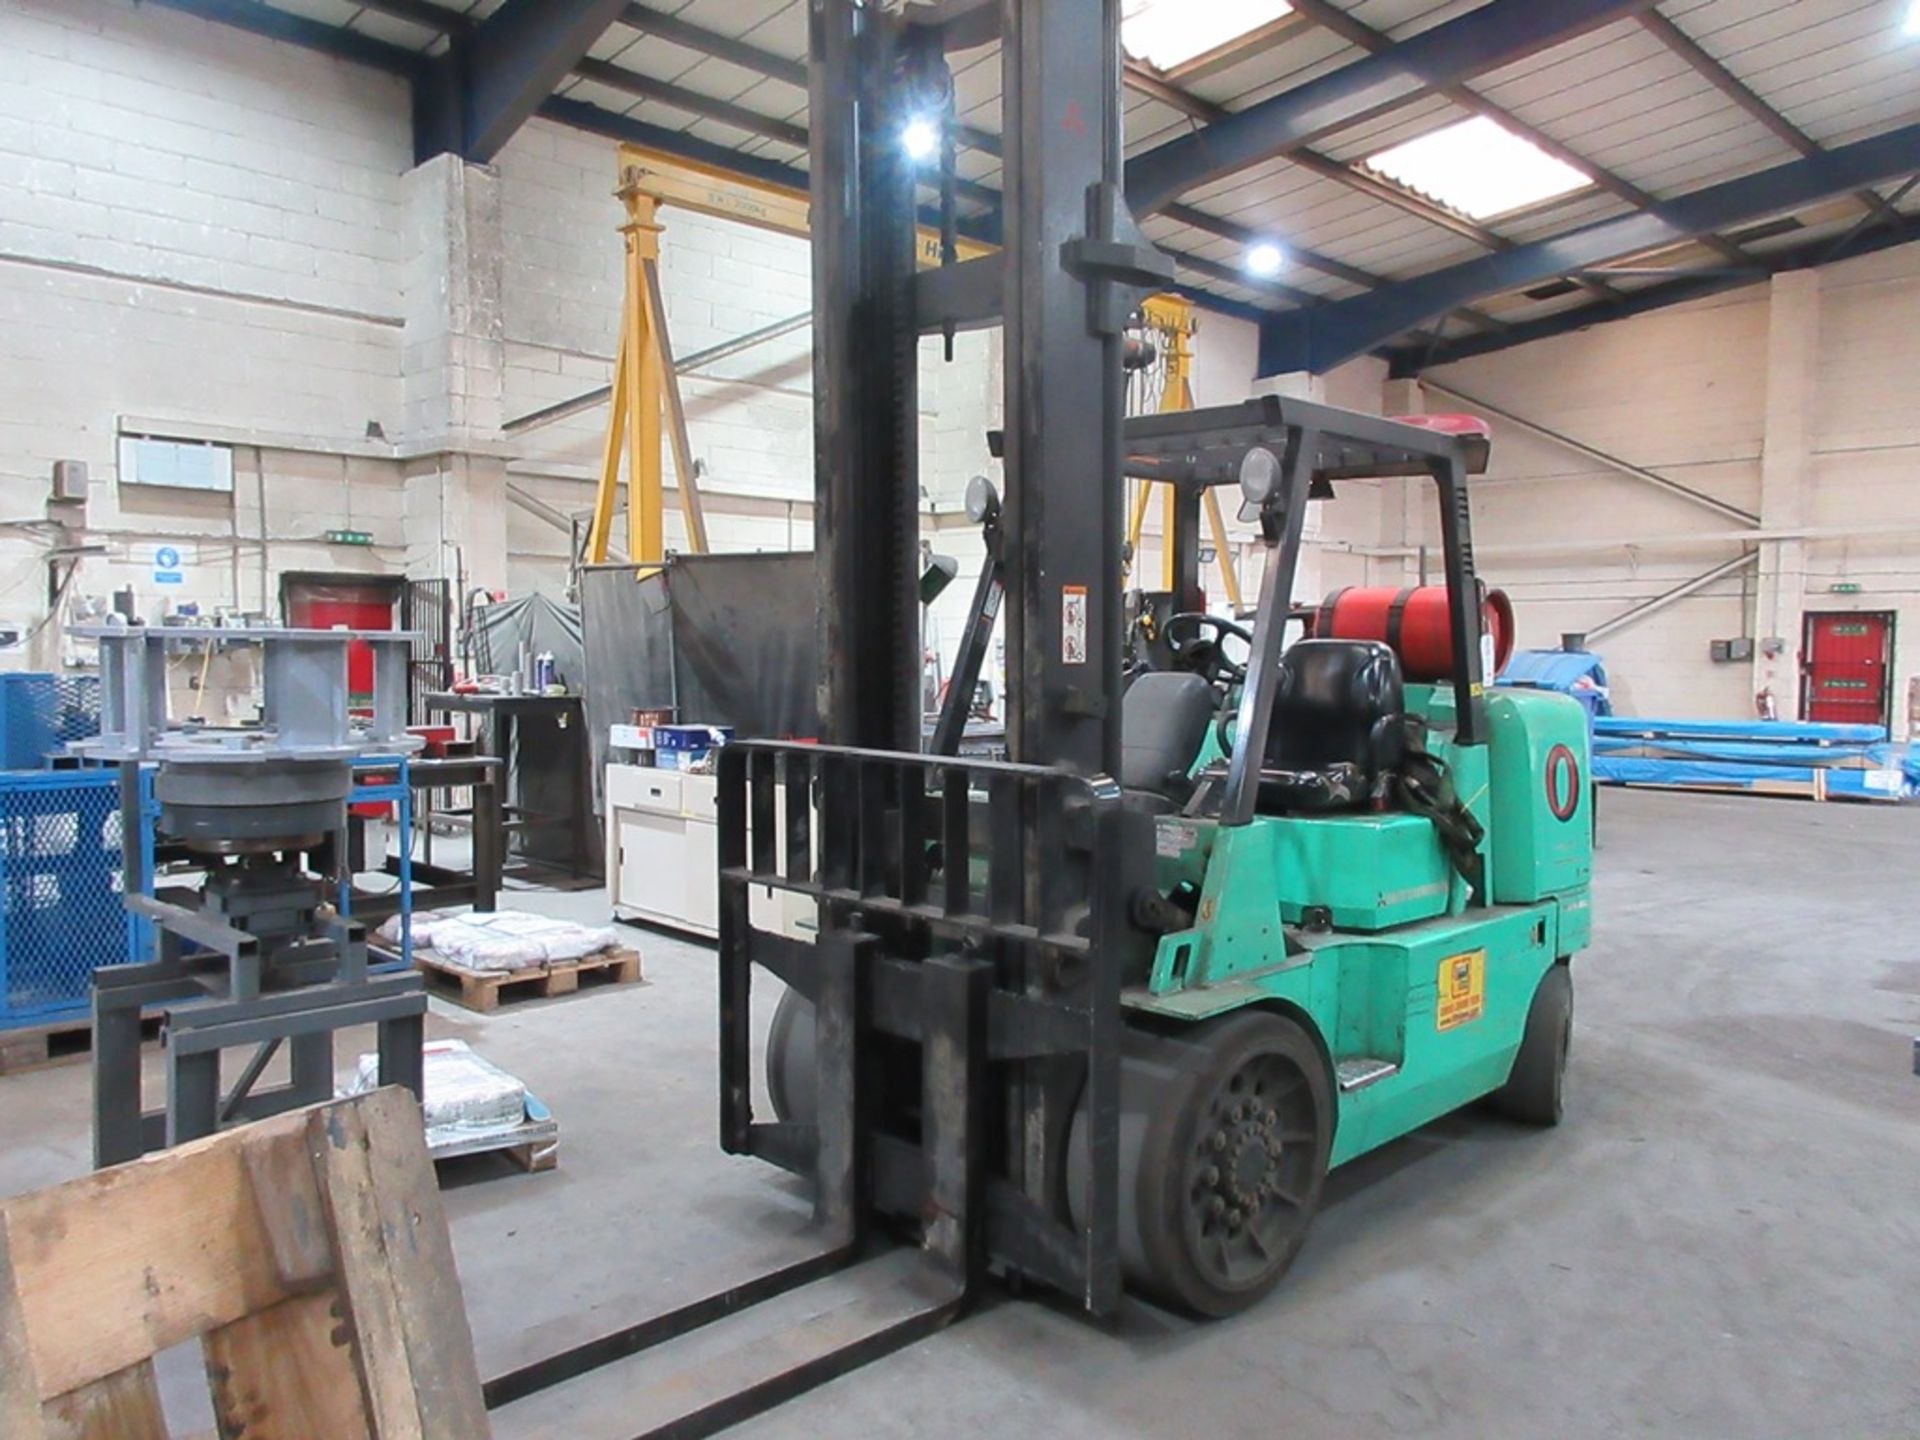 Mitsubishi FGC70KY-LP gas operated dual mast forklift truck serial no. AF89A1271 (2007) rated